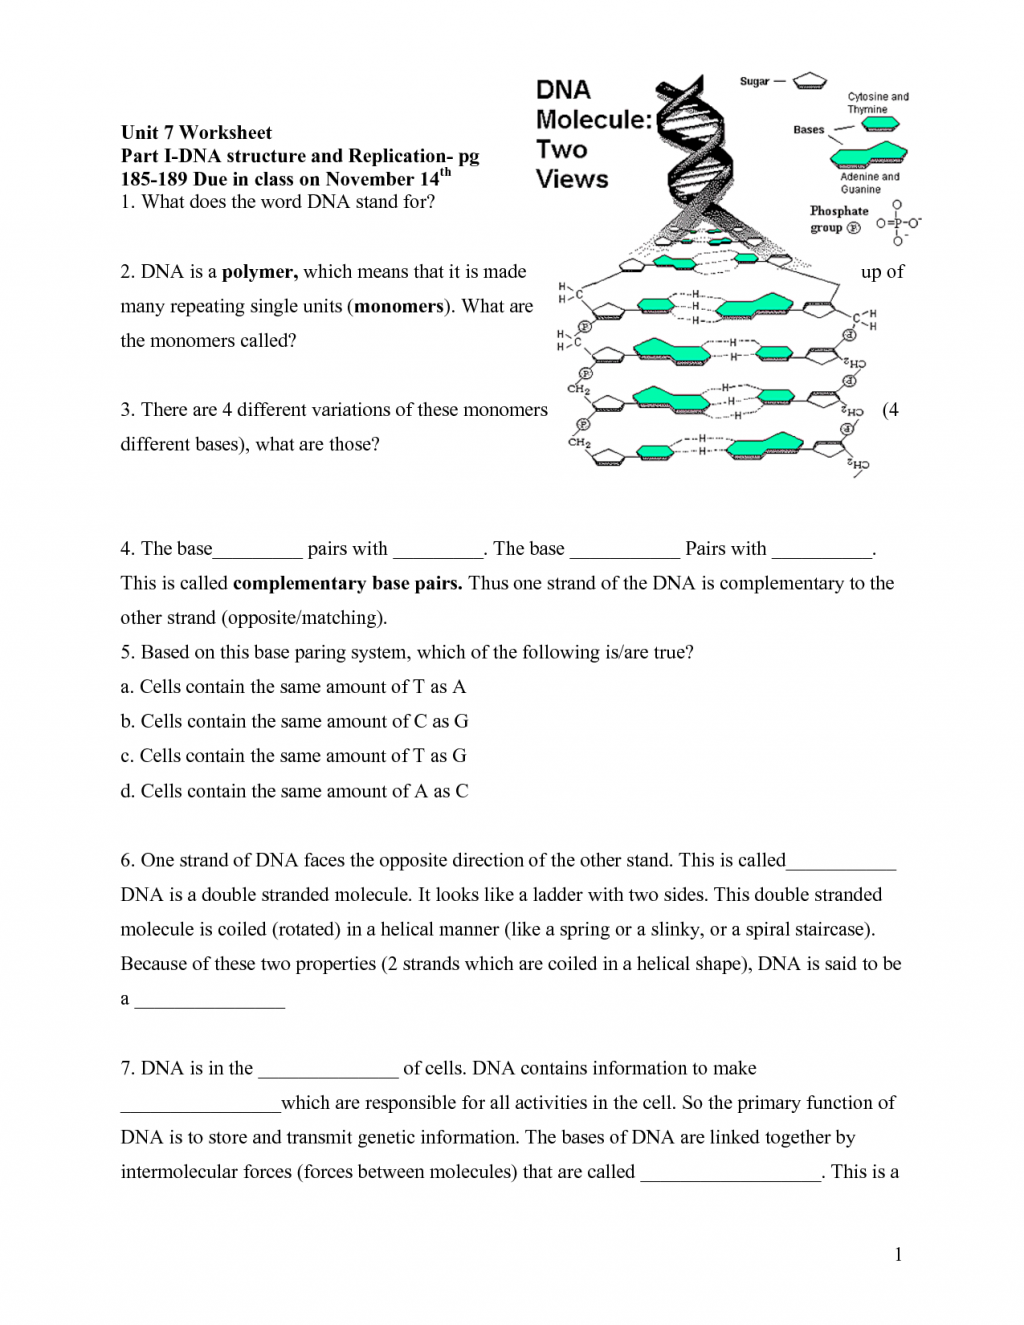 25 Rna Worksheet in Biological Science Picture Directory - Pulpbits With Dna And Rna Worksheet